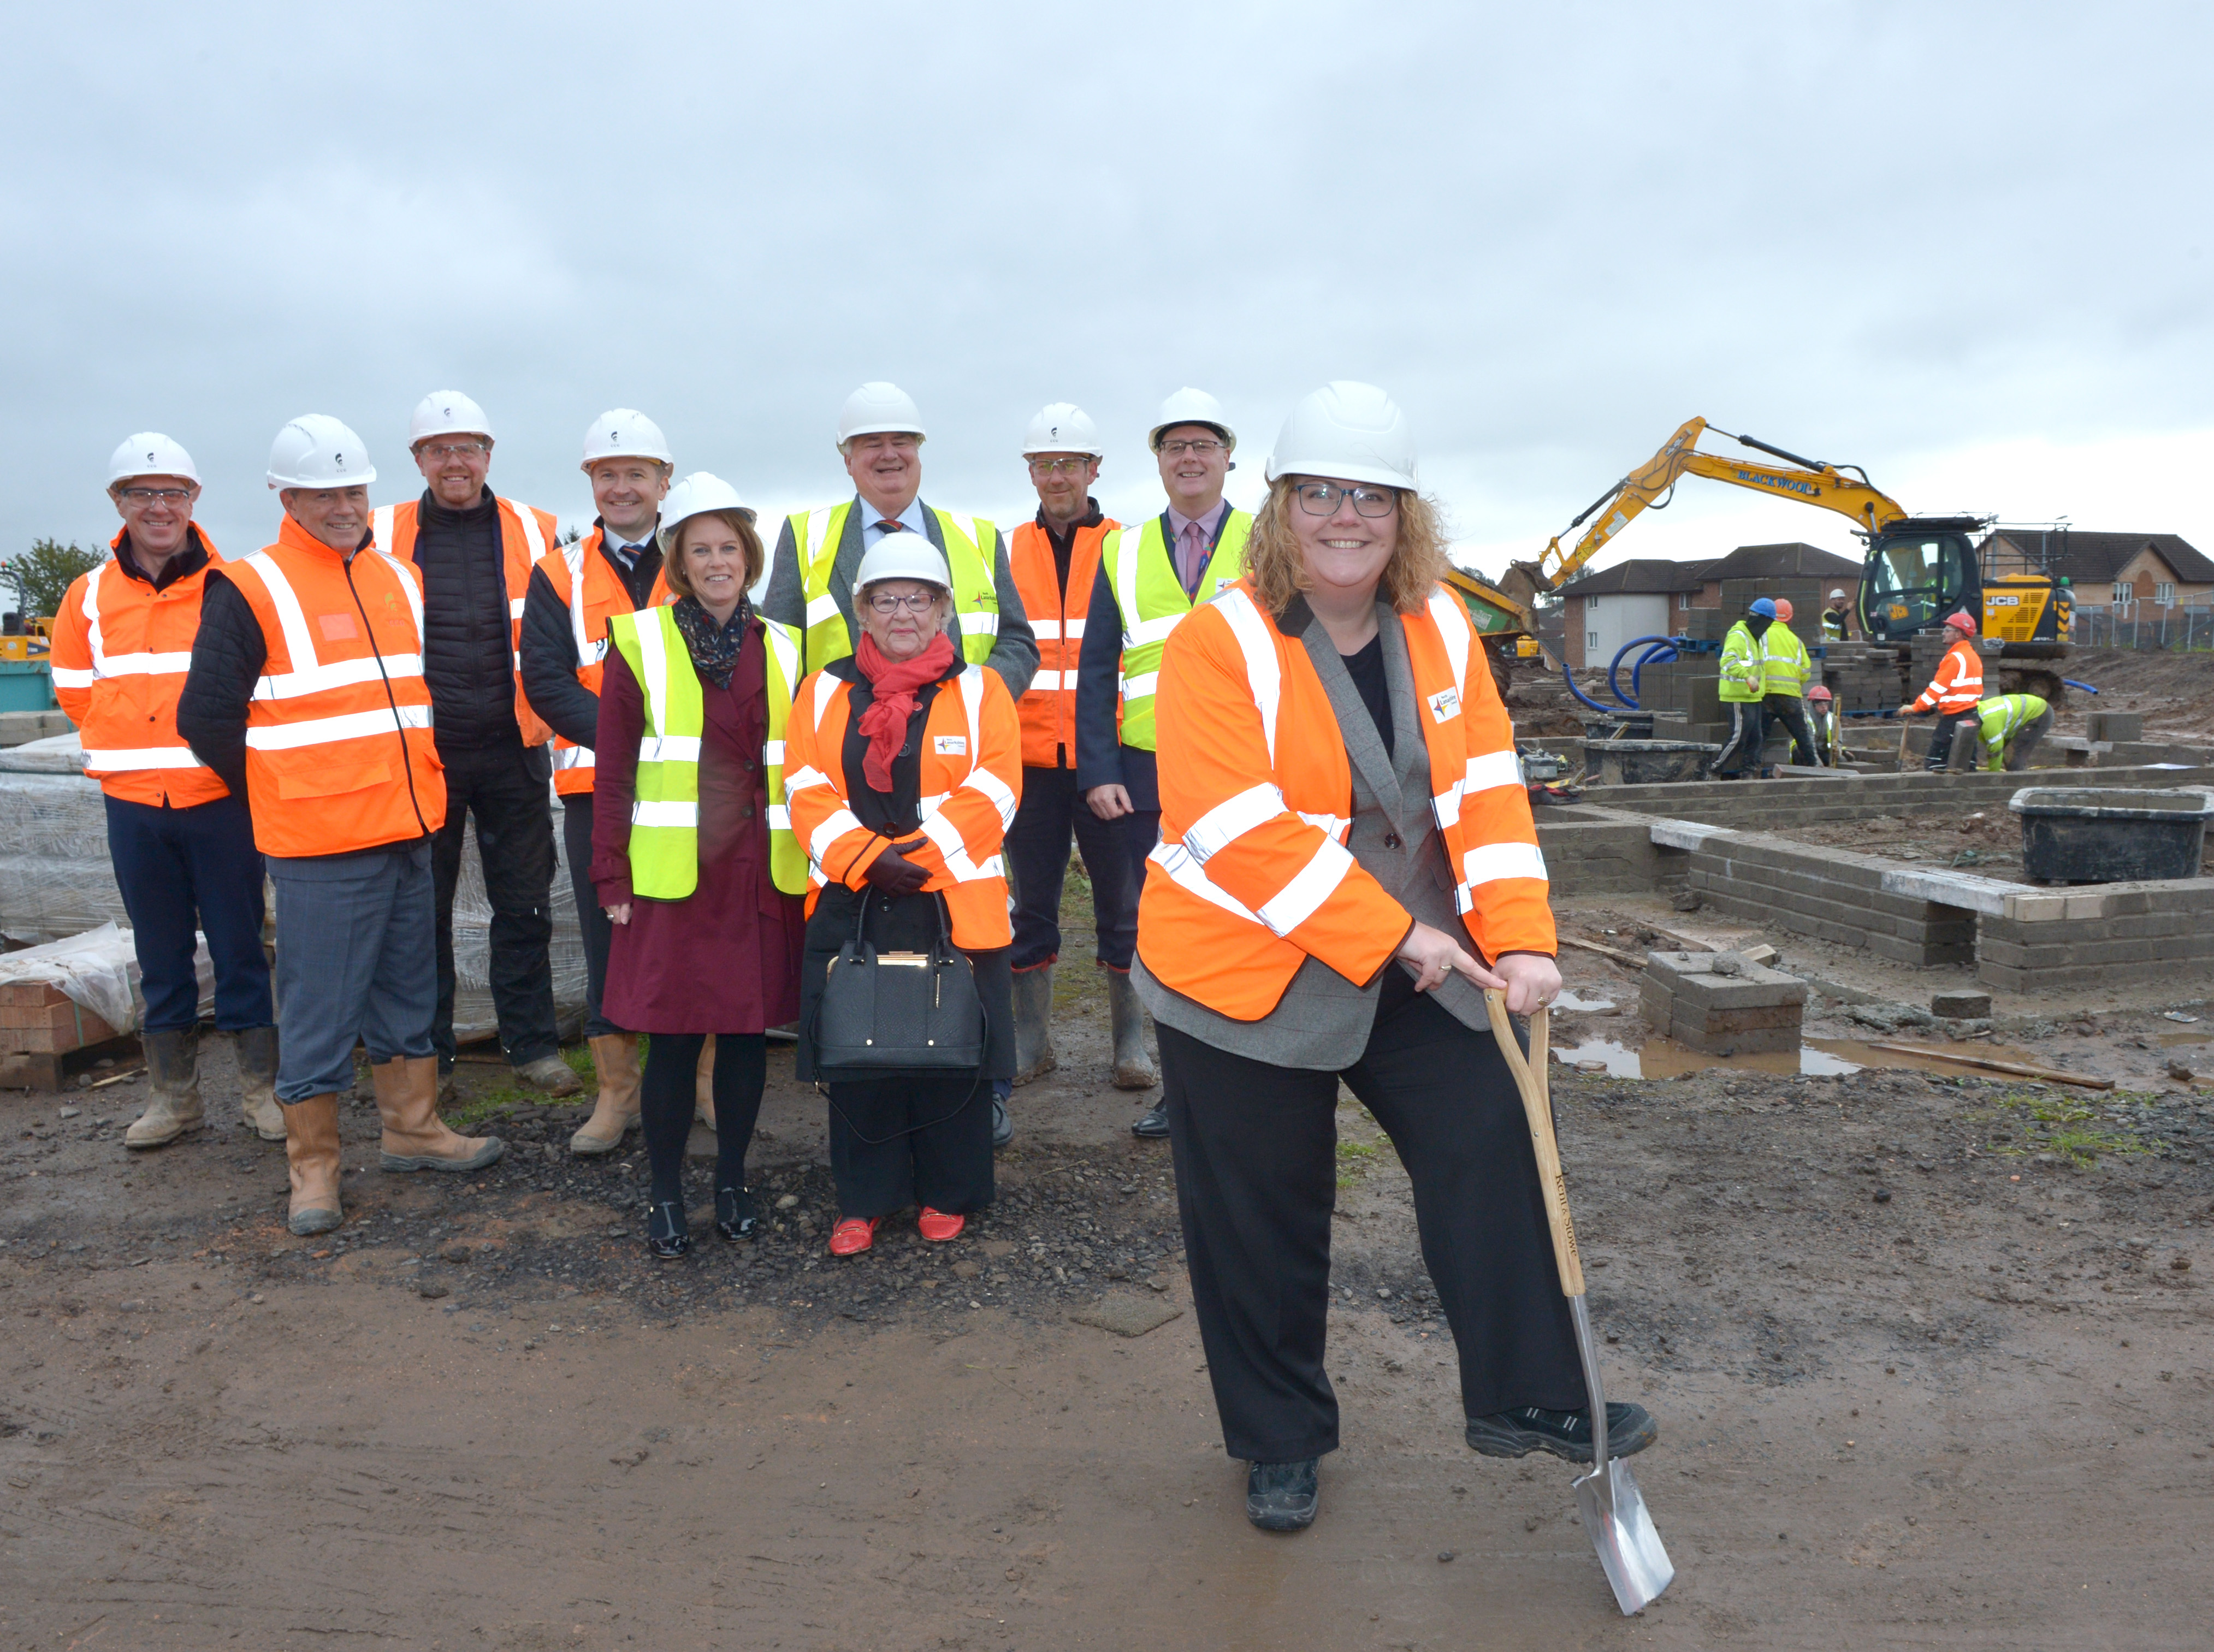 Former Coatbridge school site ready for new council homes